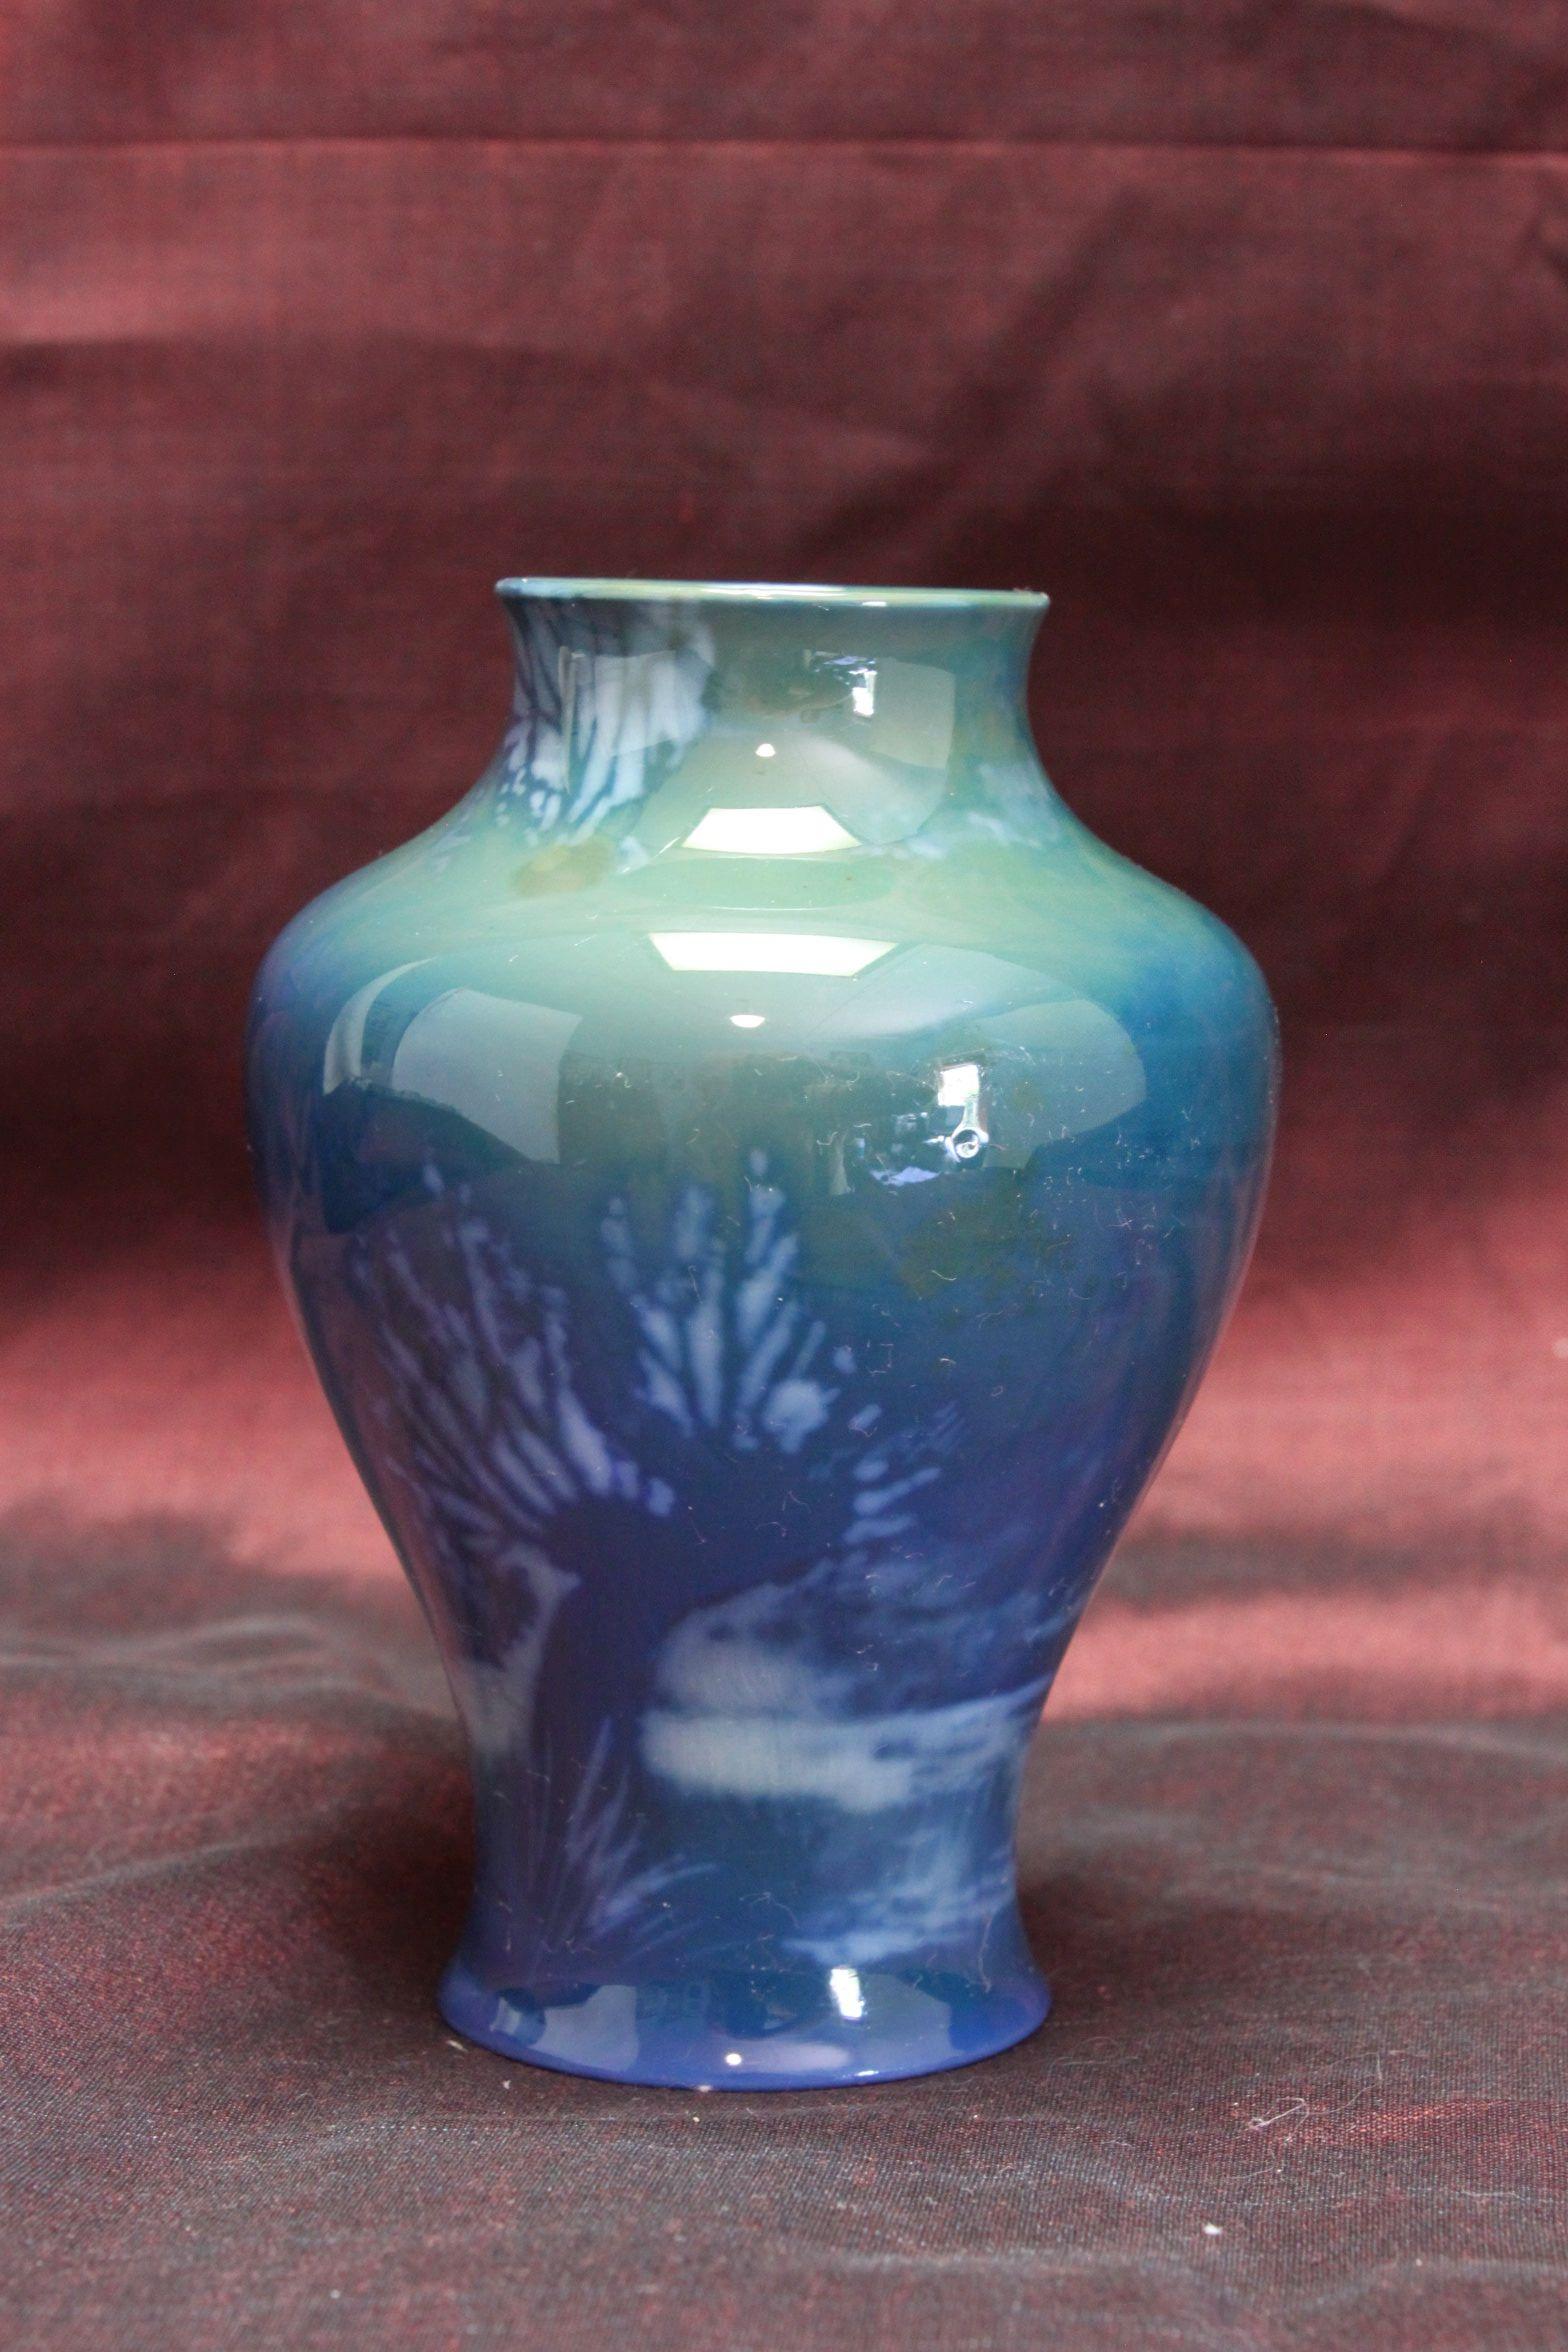 This small baluster shaped vase is by Royal Worcester and is from their Sabrina Ware range. The vase is hand painted by Walter Sedgley who was at the Worcester factory from 1889 until 1929 and was one of their principal painters for many years. The